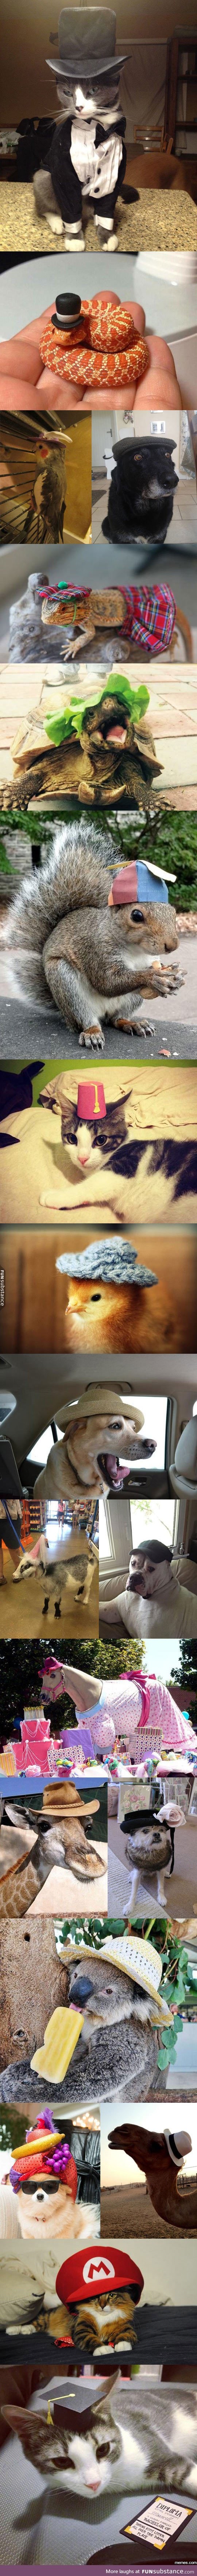 Animals with hat